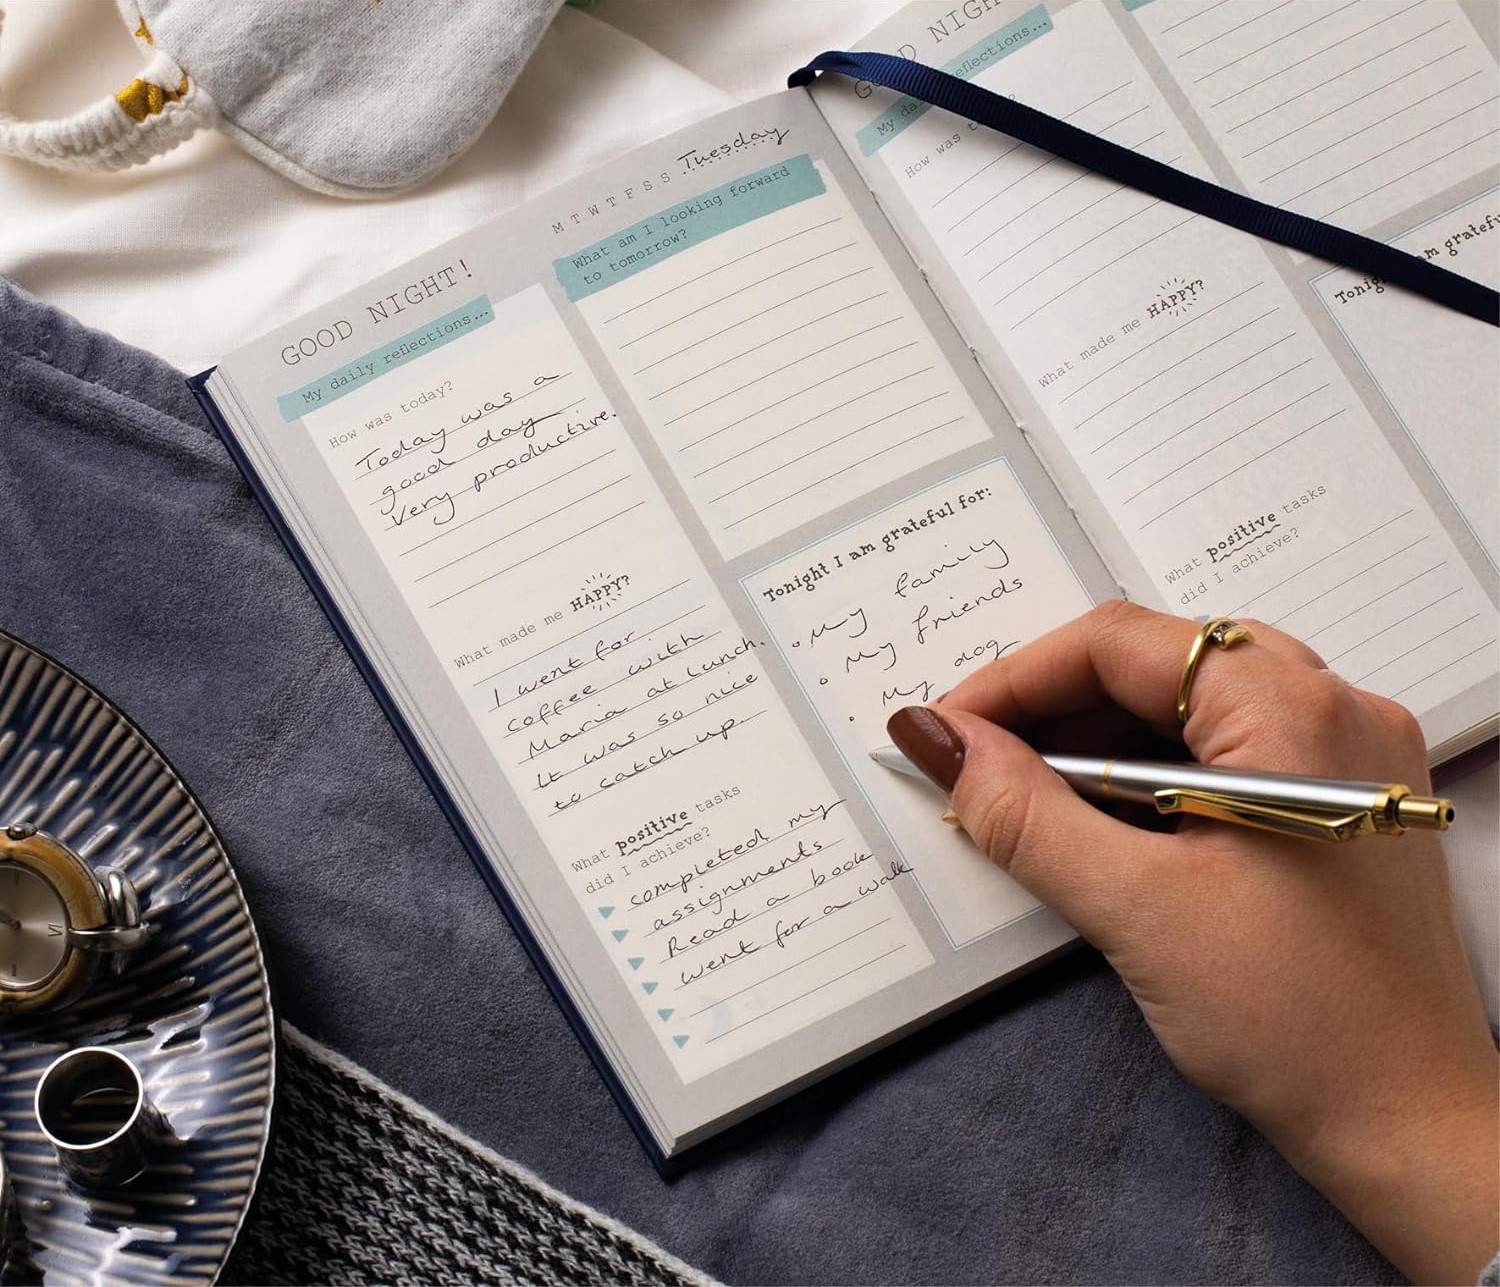 Jurnal - Journals for Life - Night Notes + Morning Motivation Journal | If (That Company Called)